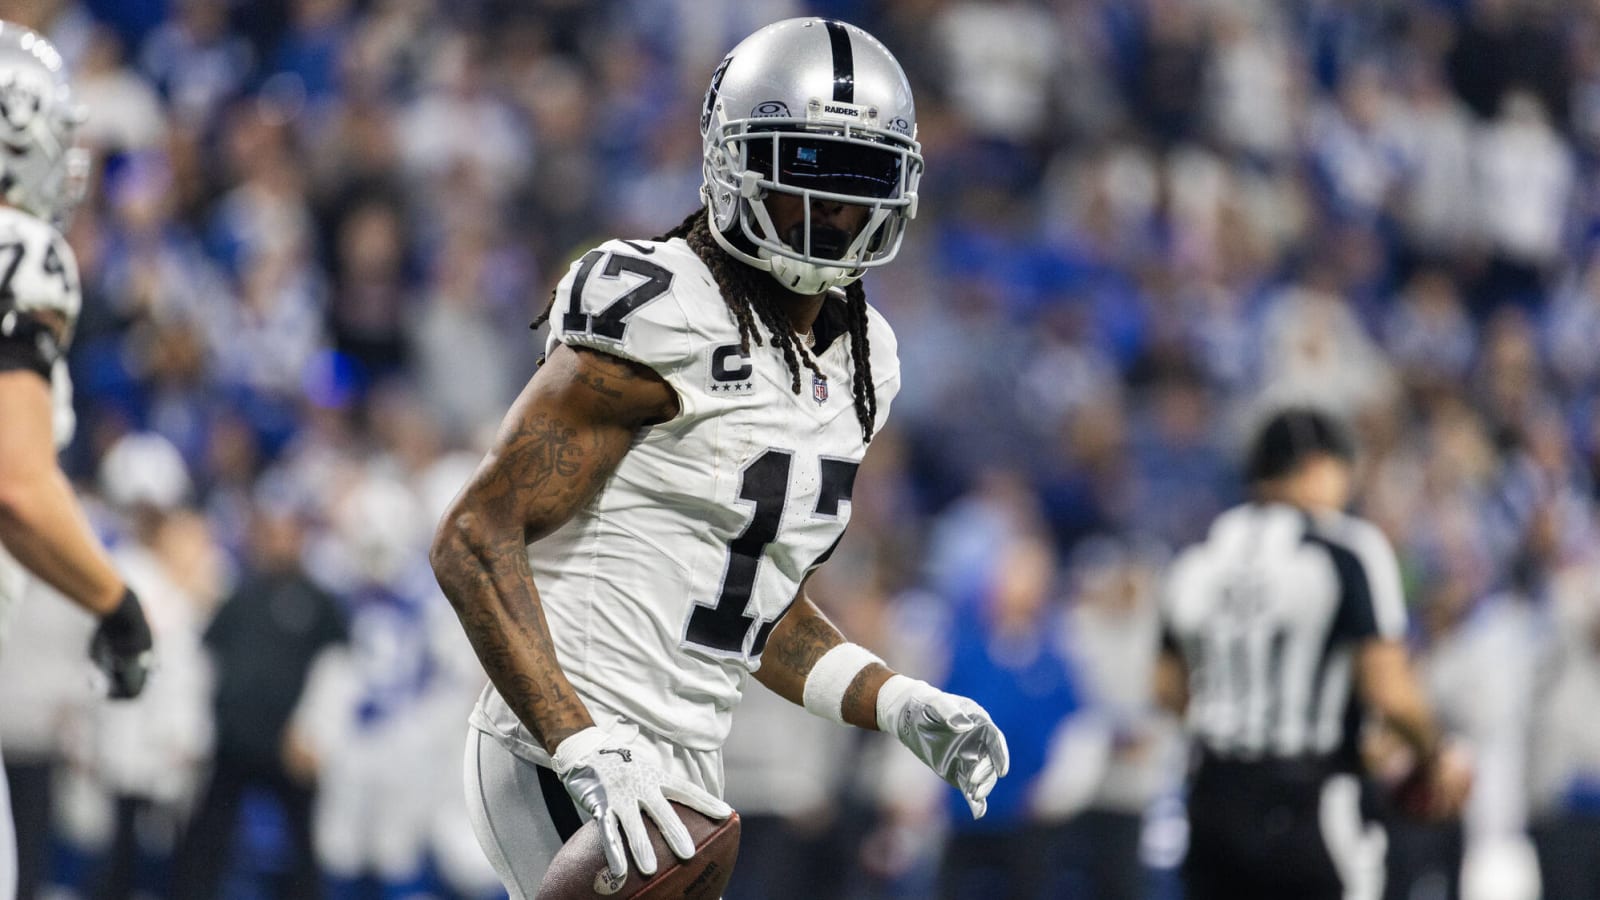 Davante Adams makes his intentions clear about sticking with the Raiders in near future: 'If I wanted to be gone, I’d be gone by now'